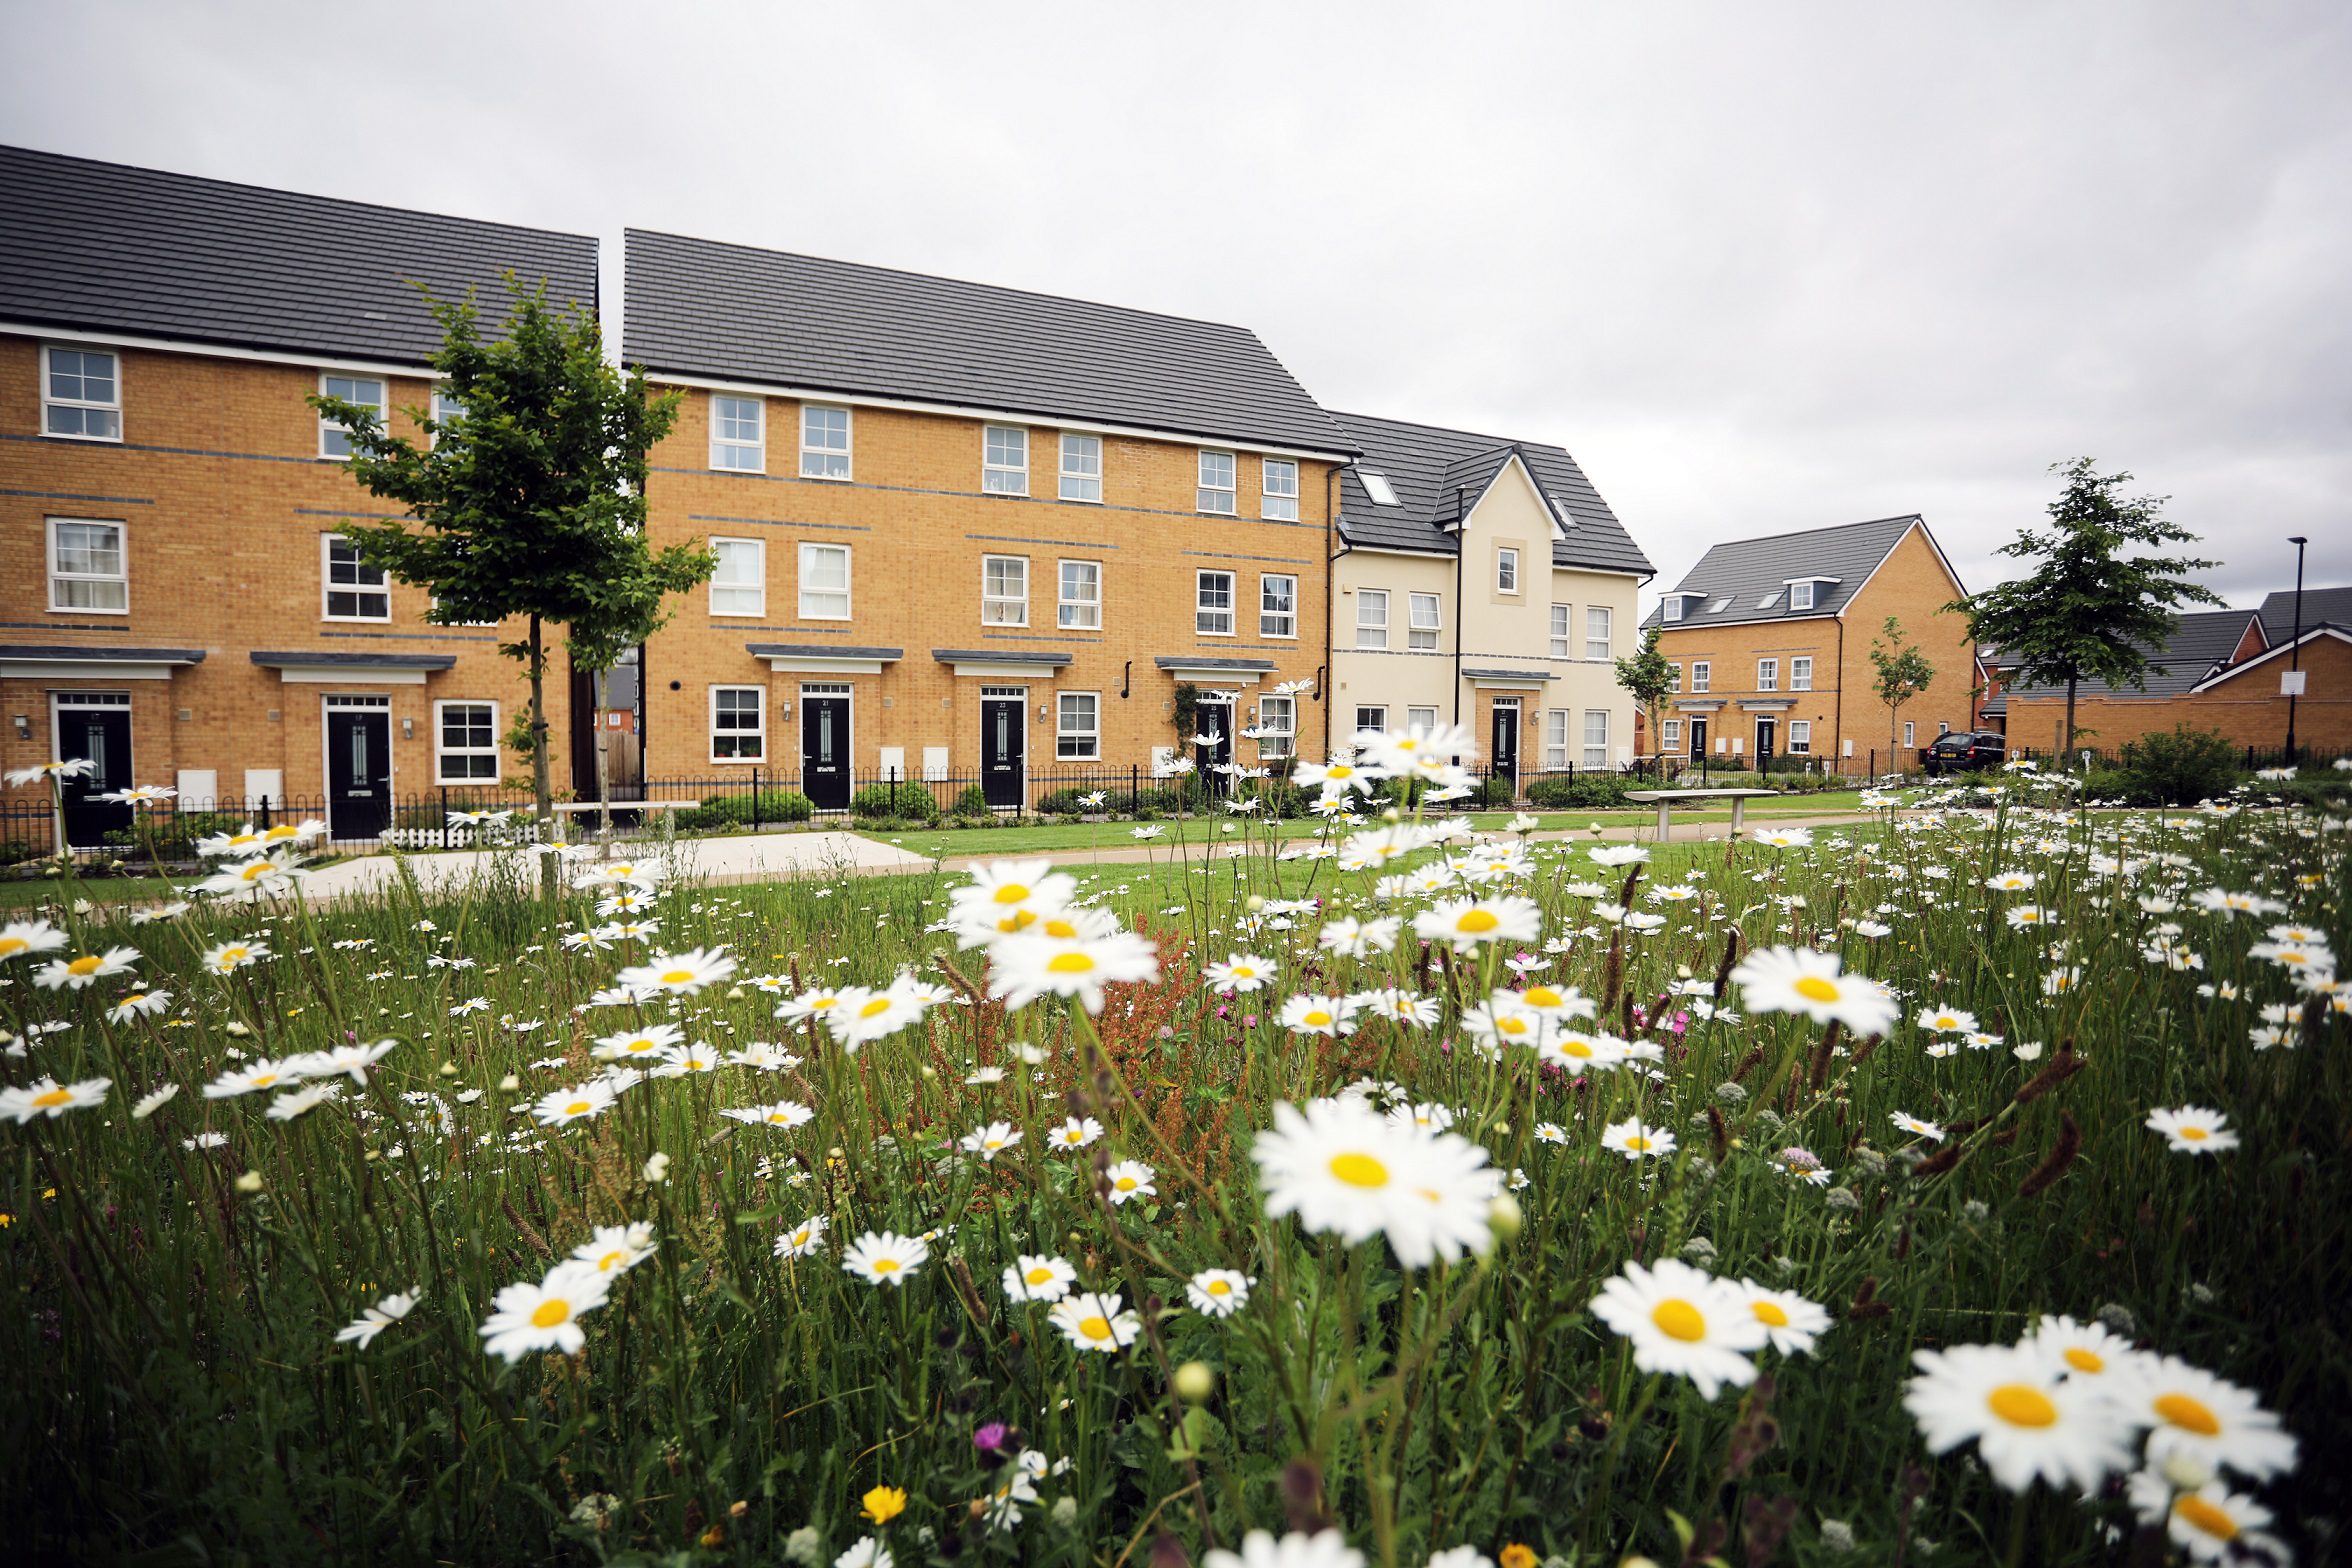 Is there an investment case for social and affordable housing in the UK?